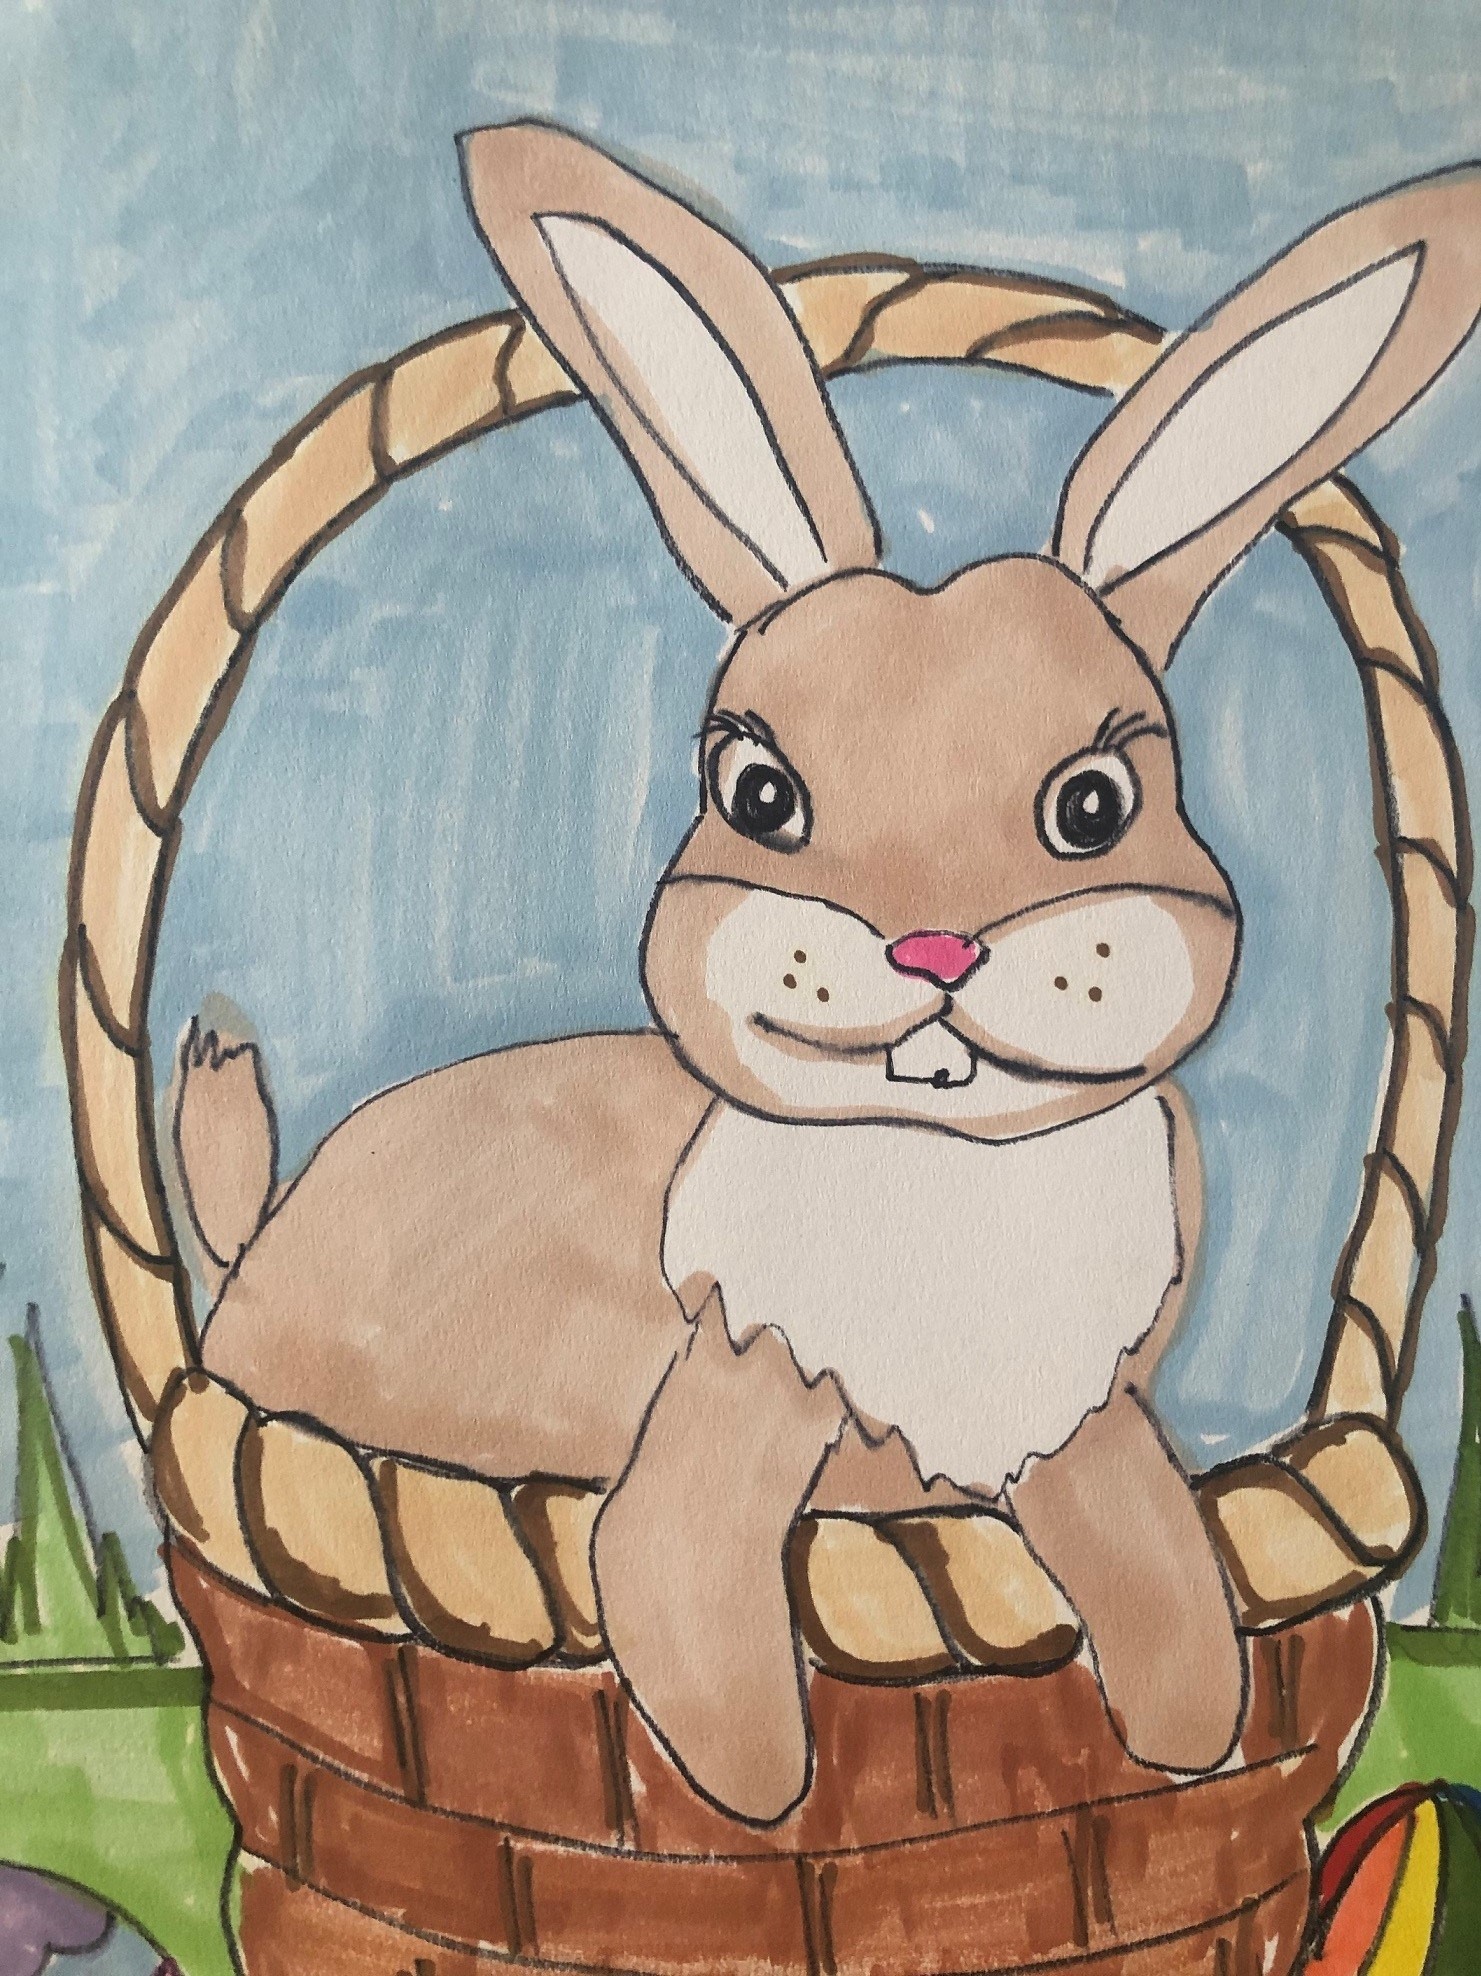 Bunny in a basket